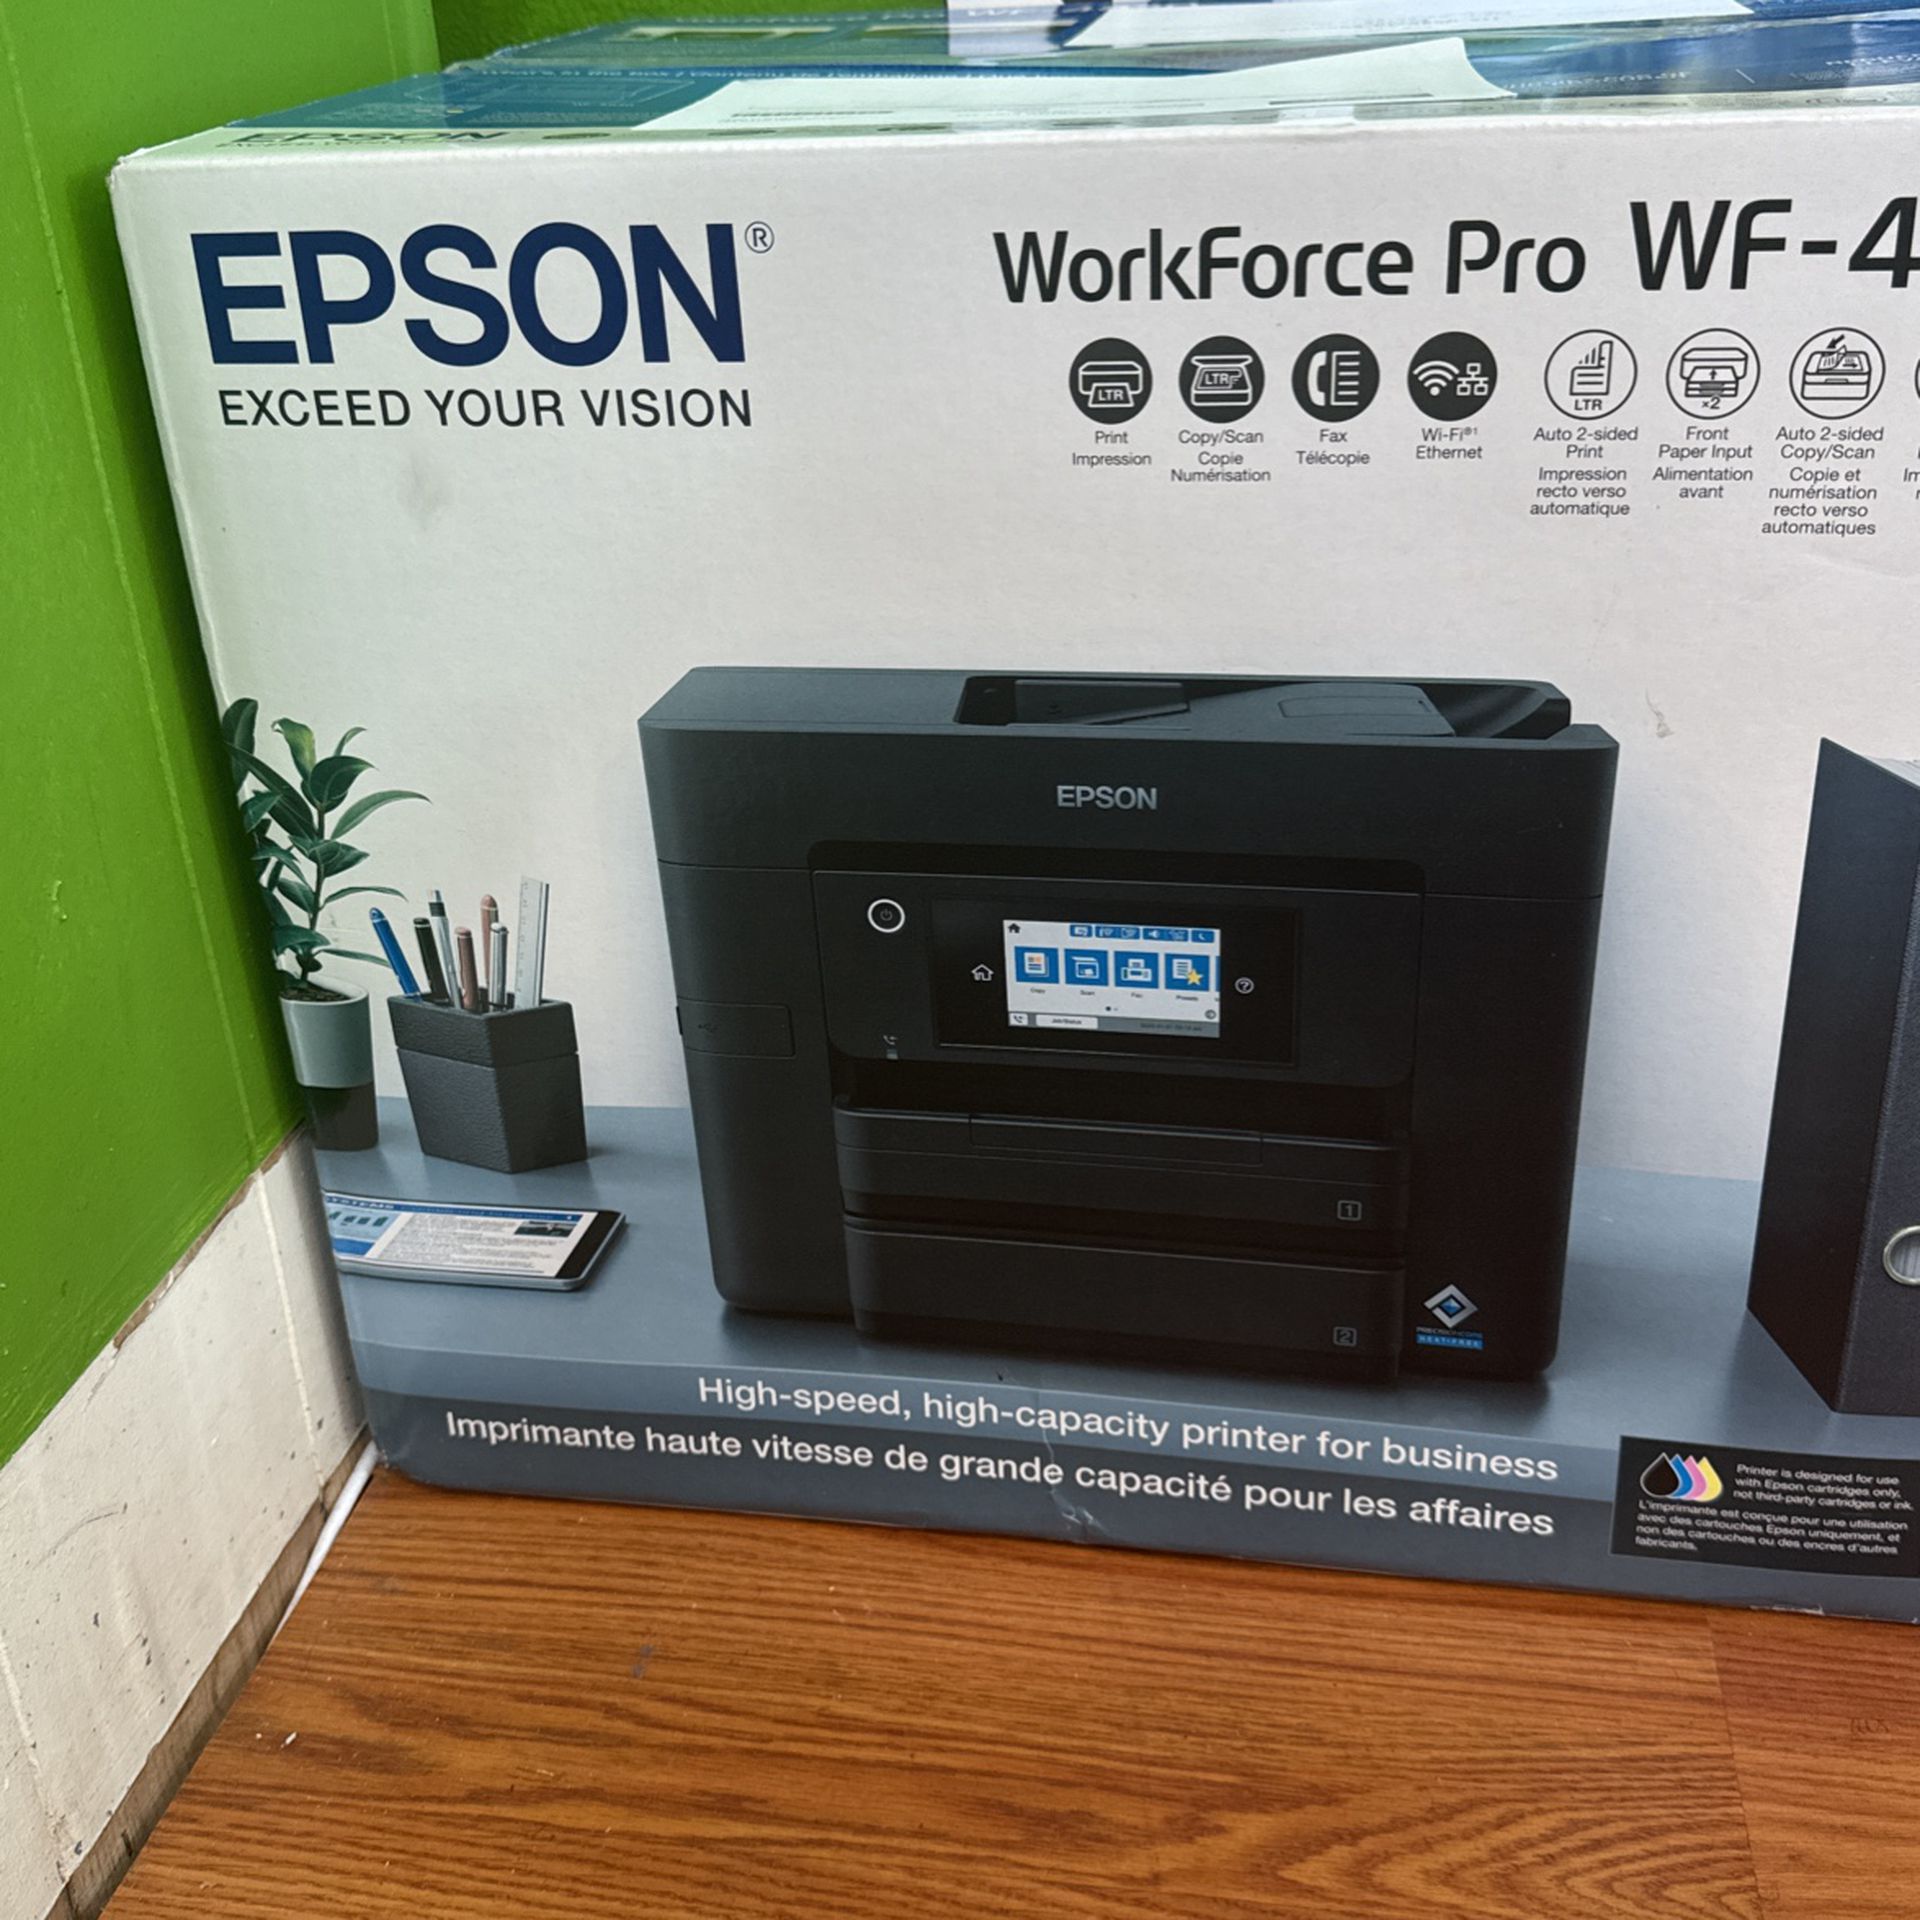 Epson WorkForce Pro WF-4830 Wireless All-in-One Printer with Auto 2-sided Print, Copy, Scan and Fax, 50-page ADF, 500-sheet Paper Capacity, and 4.3" C